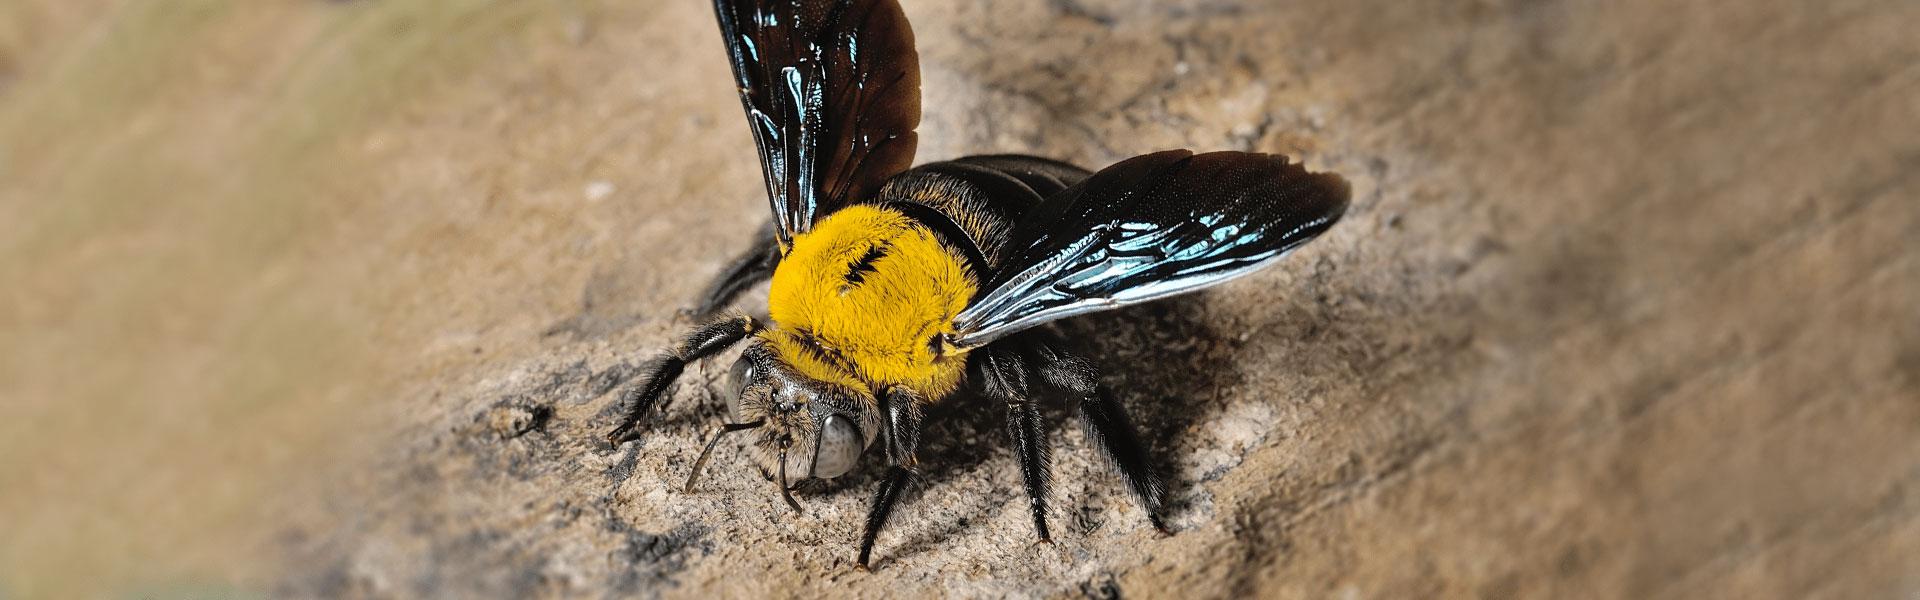 carpenter bee resting on wood surface